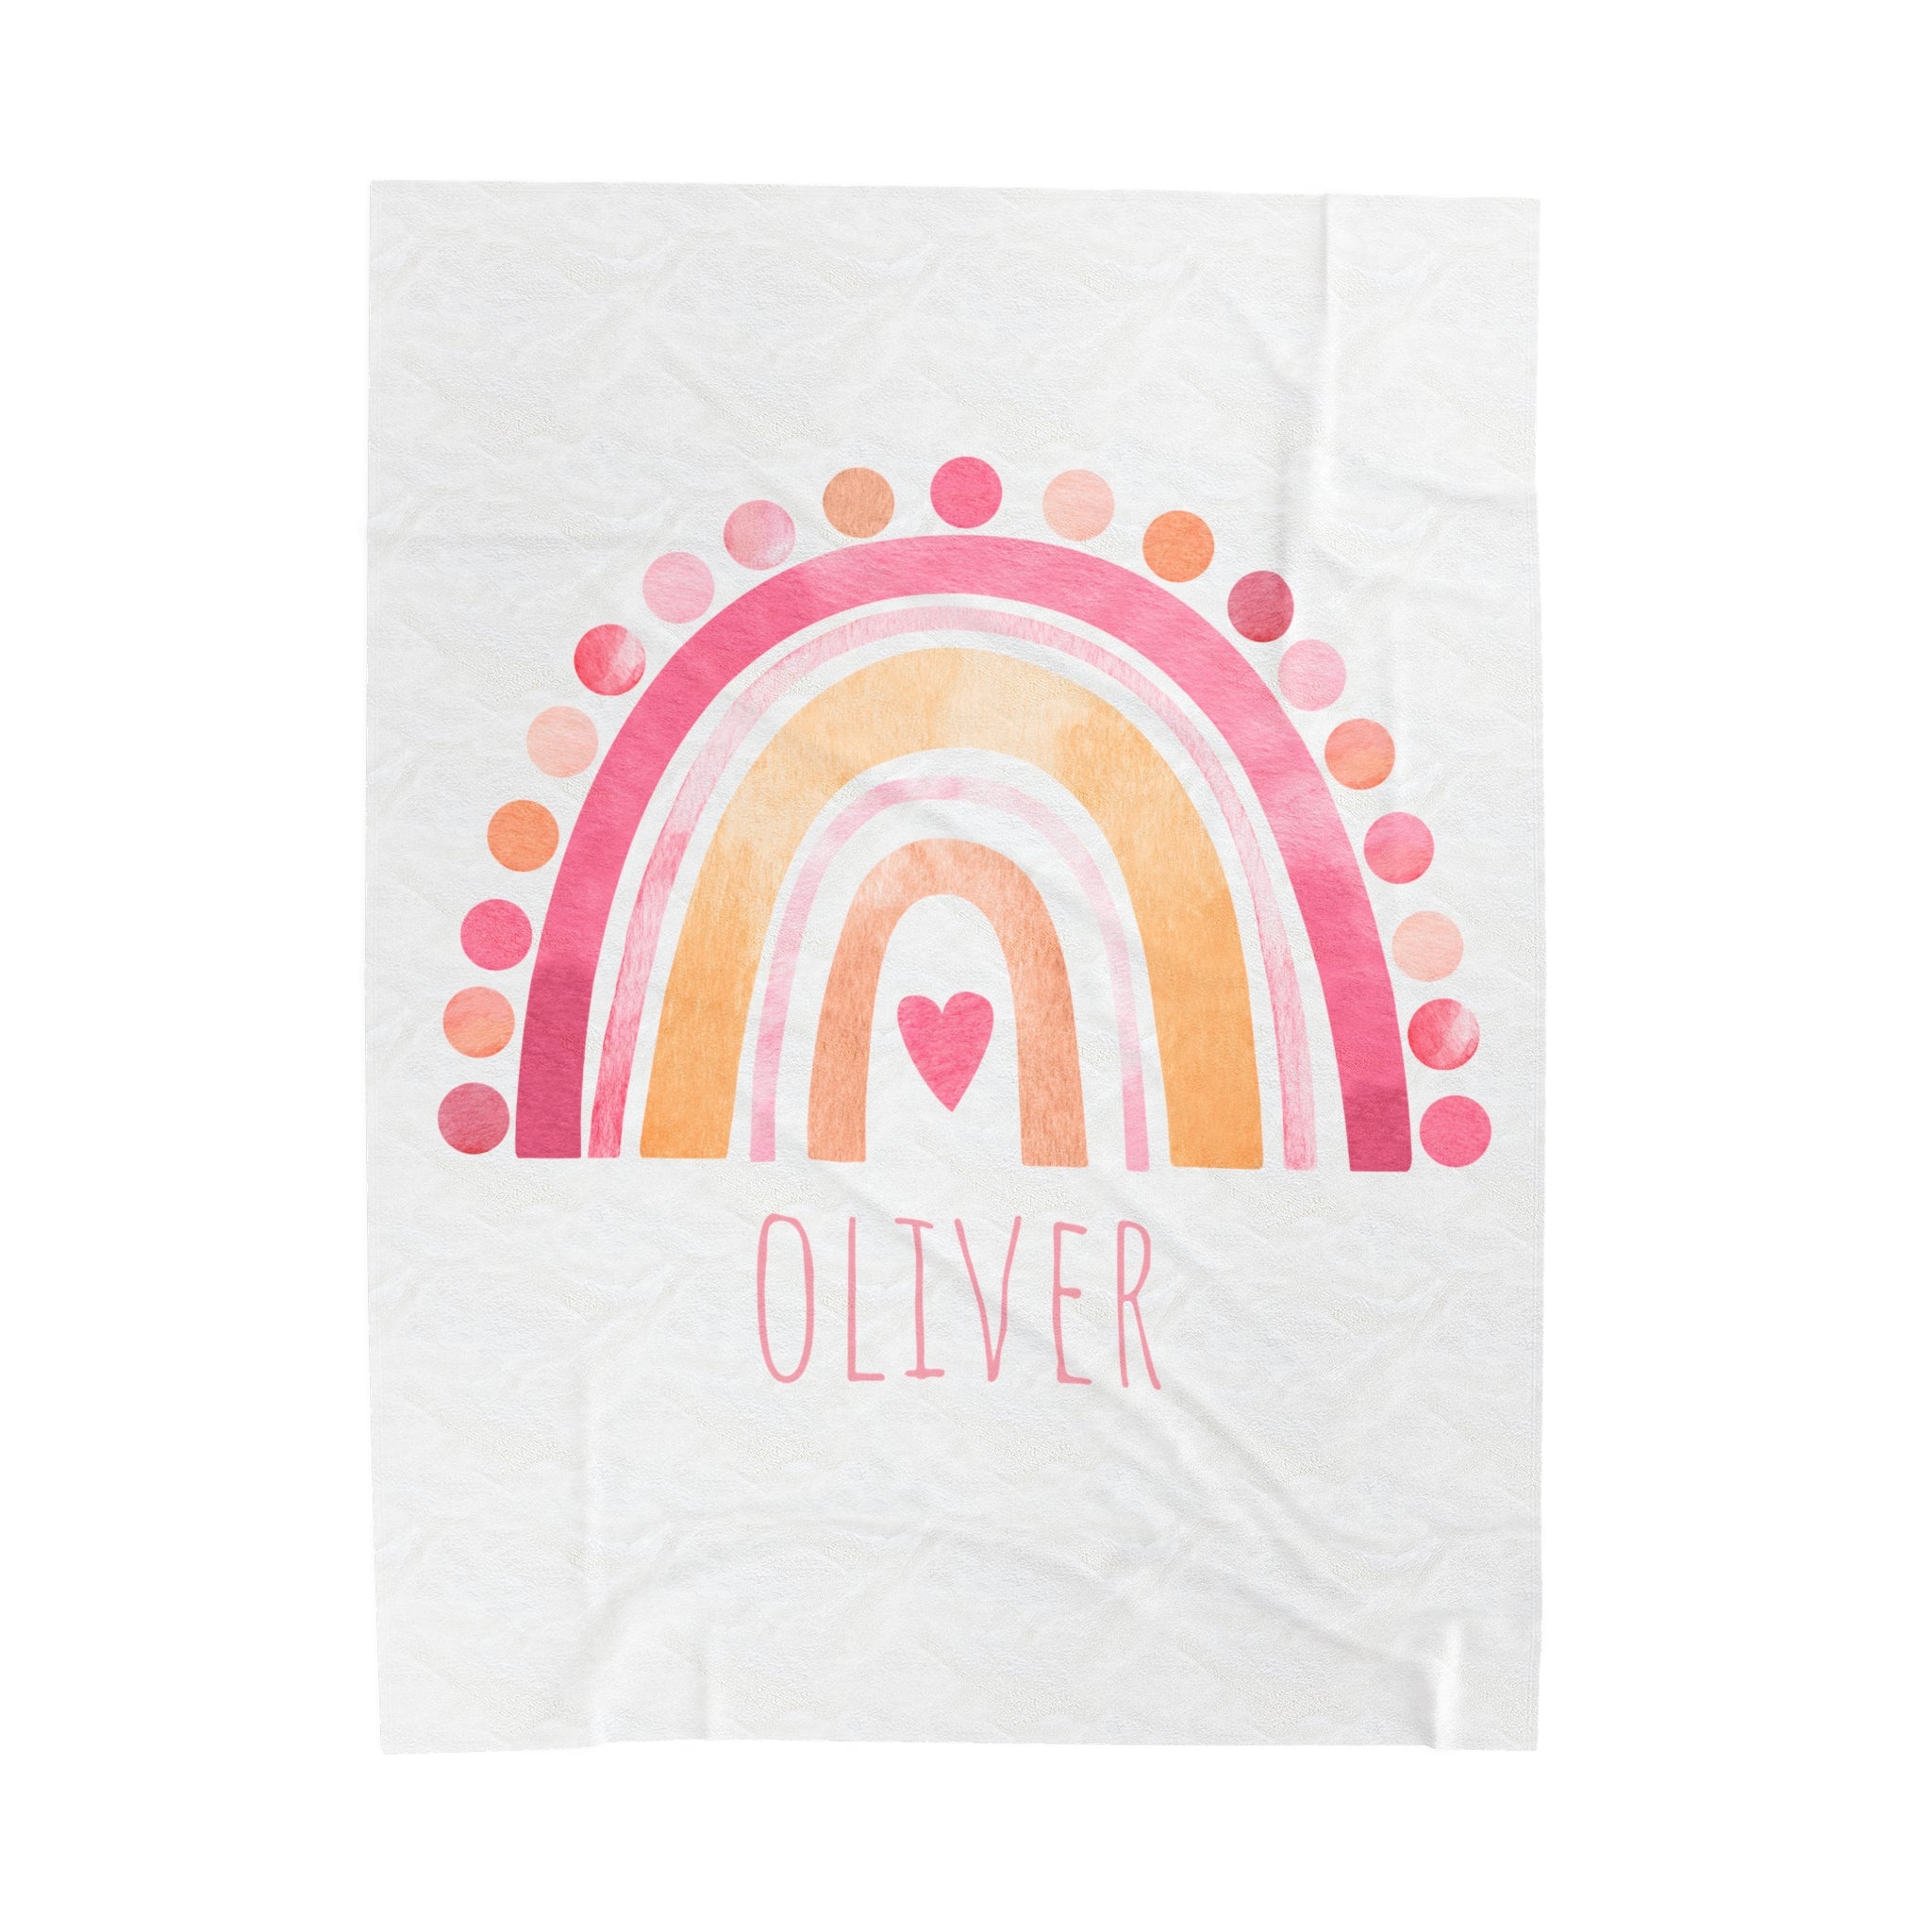 Boho Rainbow Personalized Blanket with Your name Collections Blanket #7 Custom Blanket with Name - Personalized Blanket